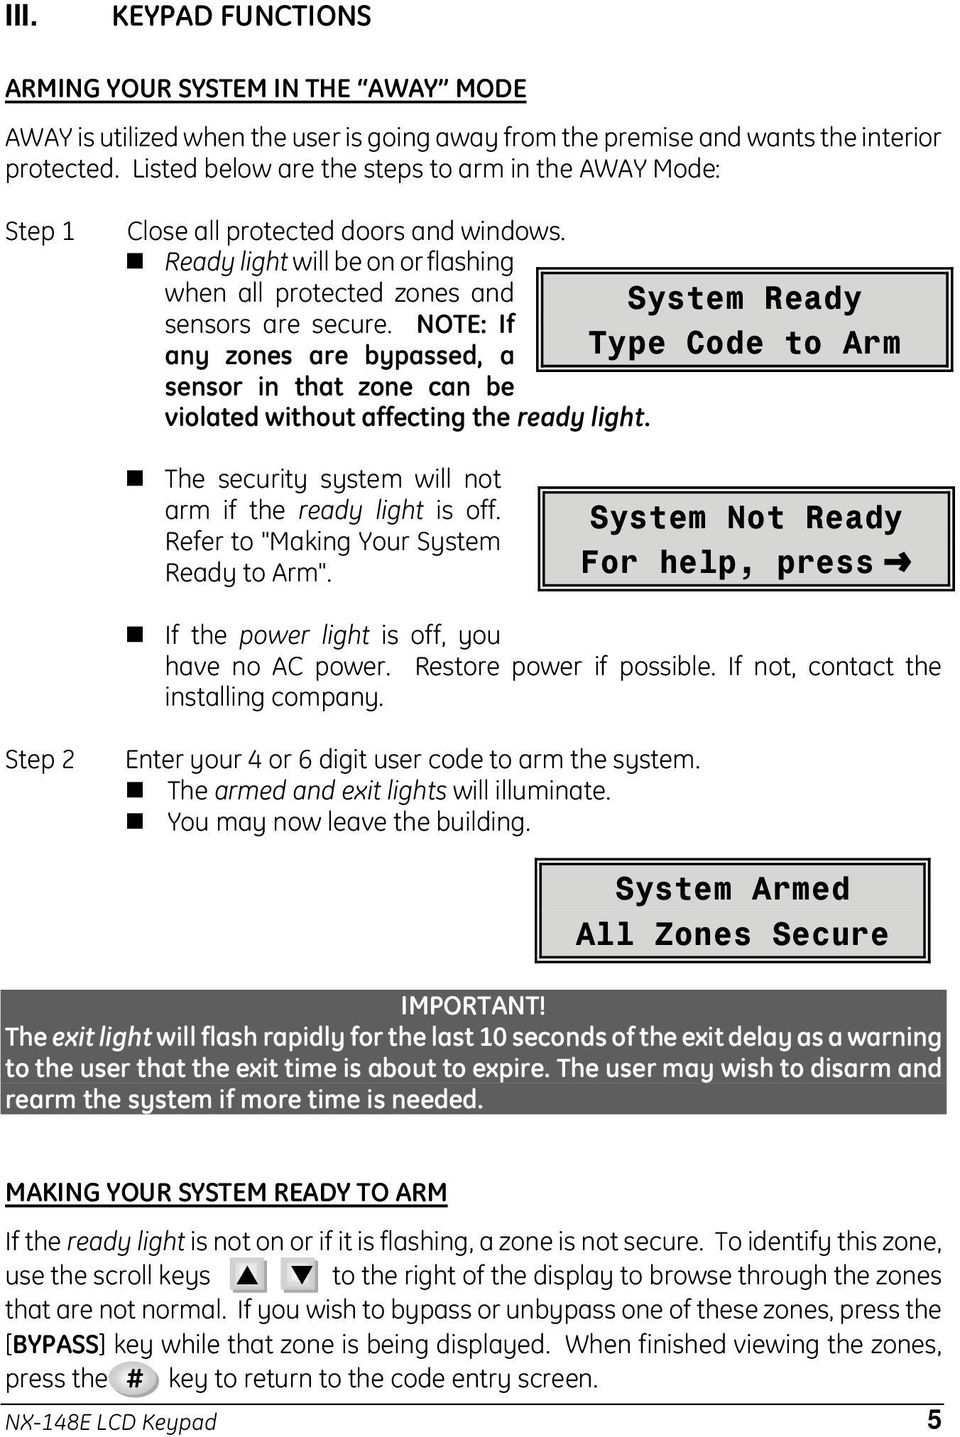 NOTE: If any zones are bypassed, a sensor in that zone can be violated without affecting the ready light. System Ready Type Code to Arm The security system will not arm if the ready light is off.